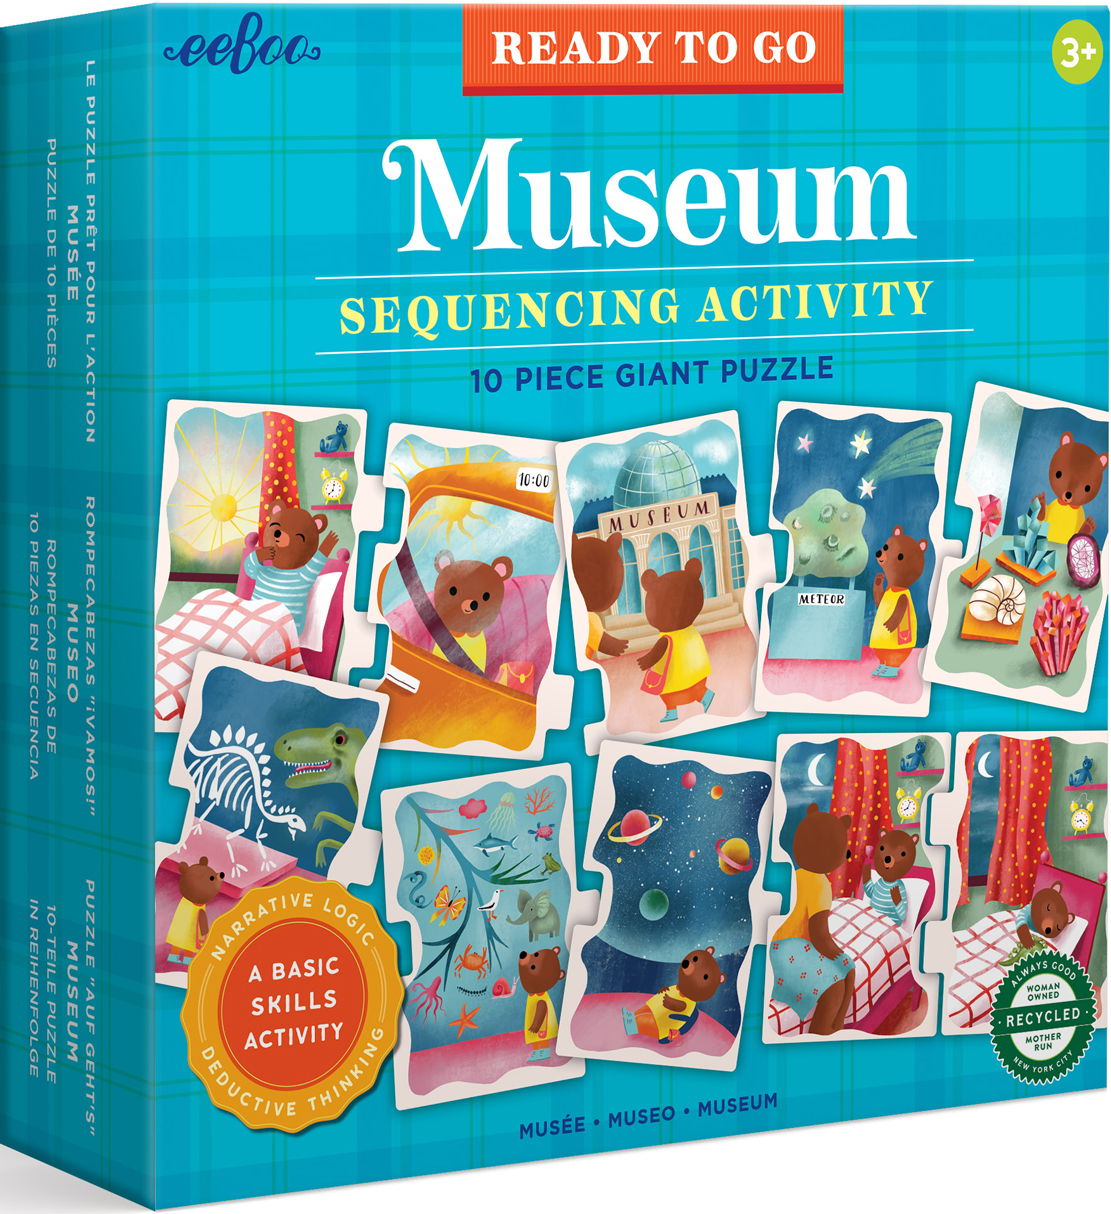 Ready to Go Puzzle - Museum Educational Jigsaw Puzzle